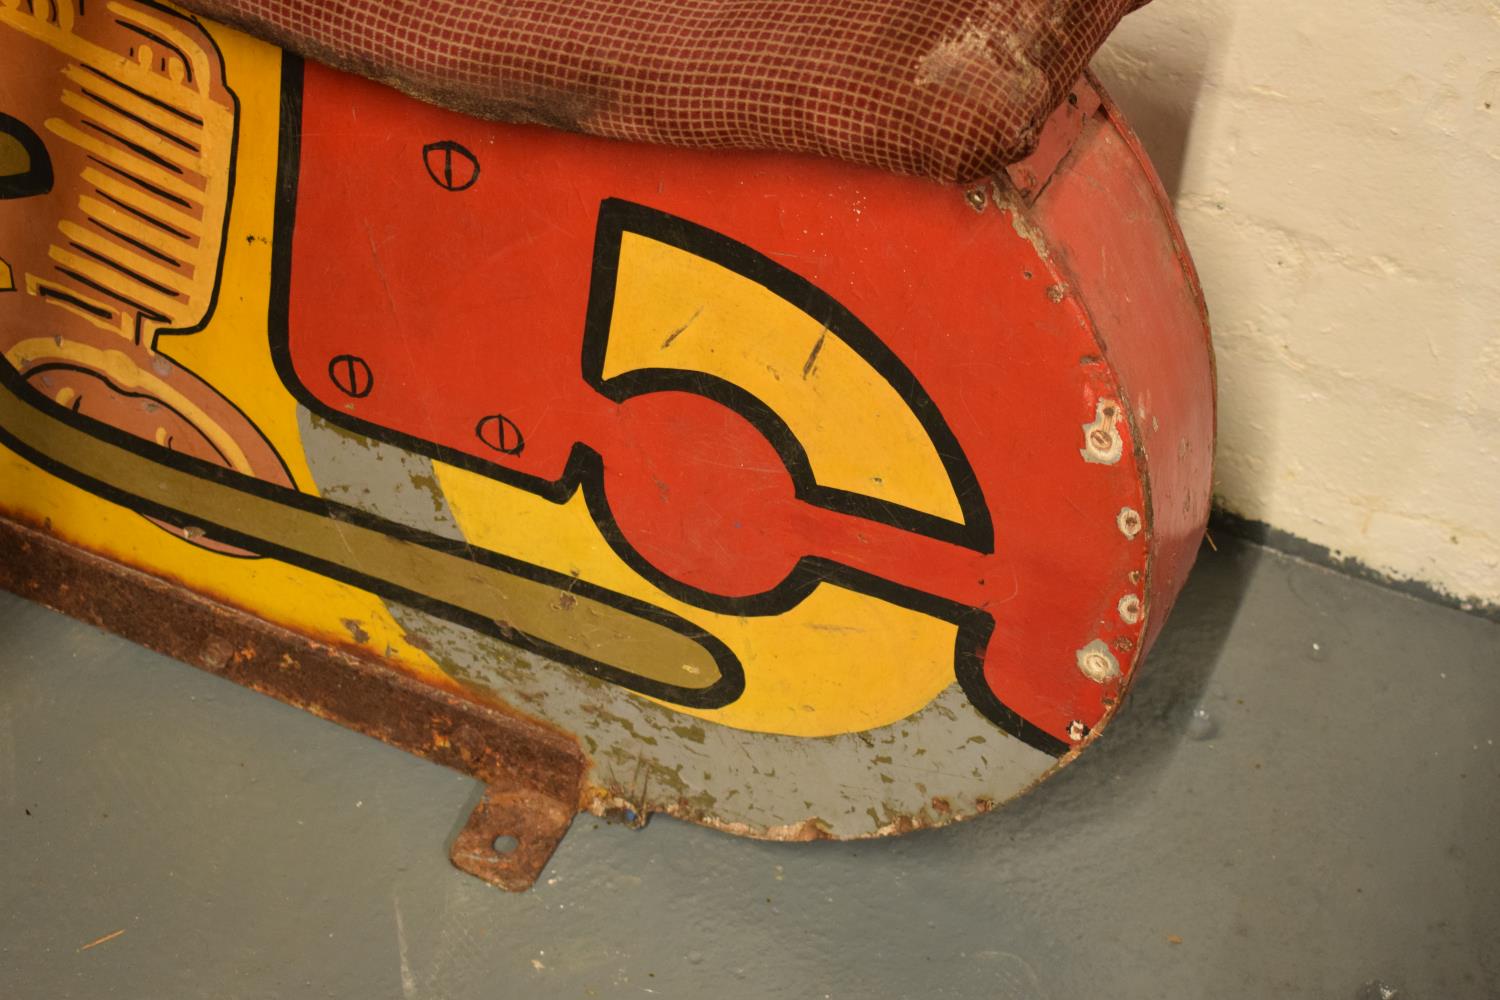 1950s speedway bike from a fairground ride - Image 3 of 8